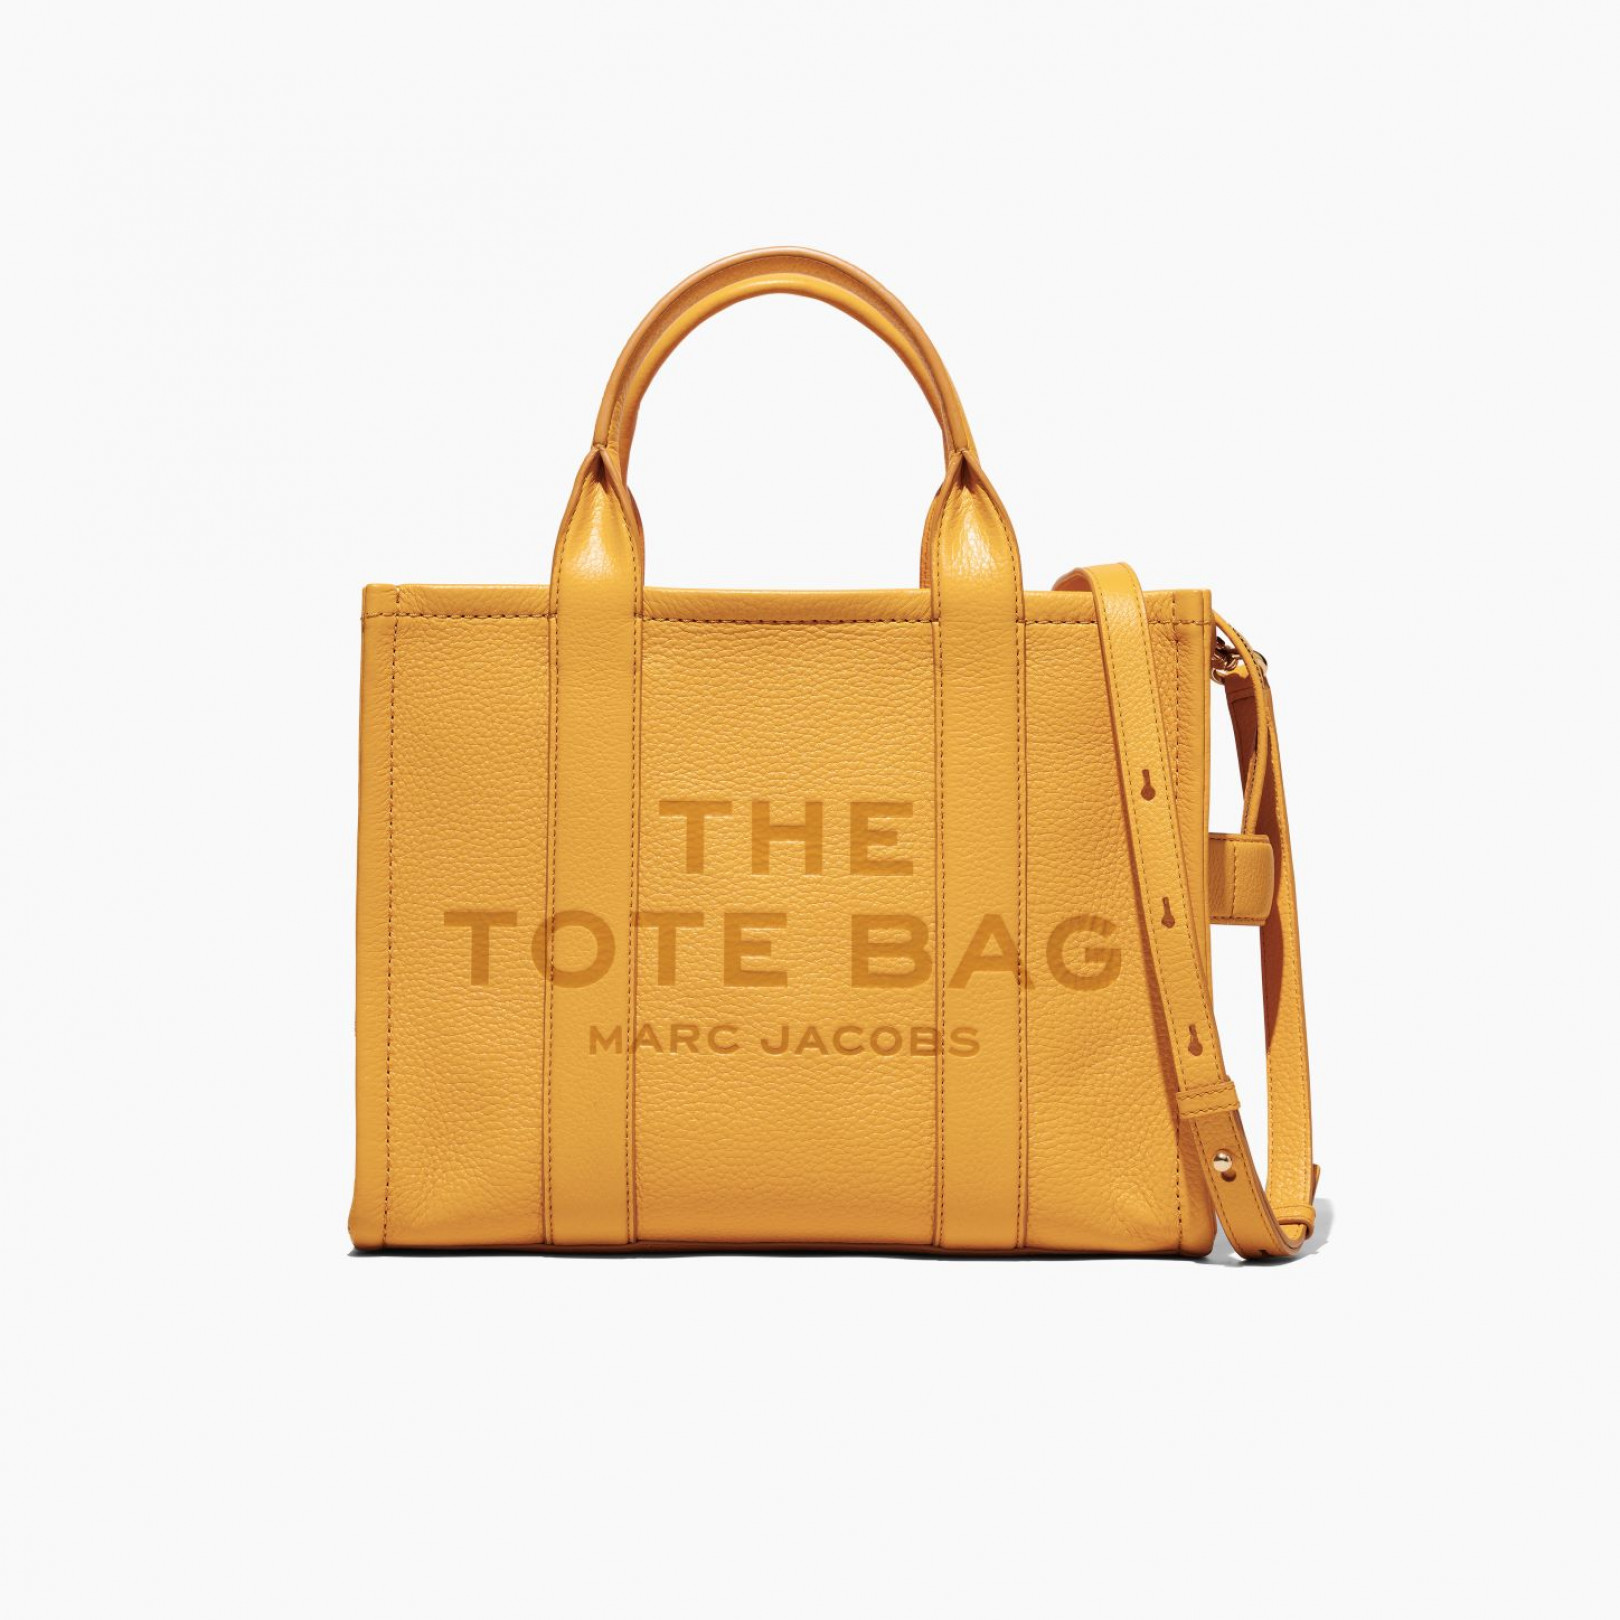 THE LEATHER SMALL TOTE BAG 7万1,500円